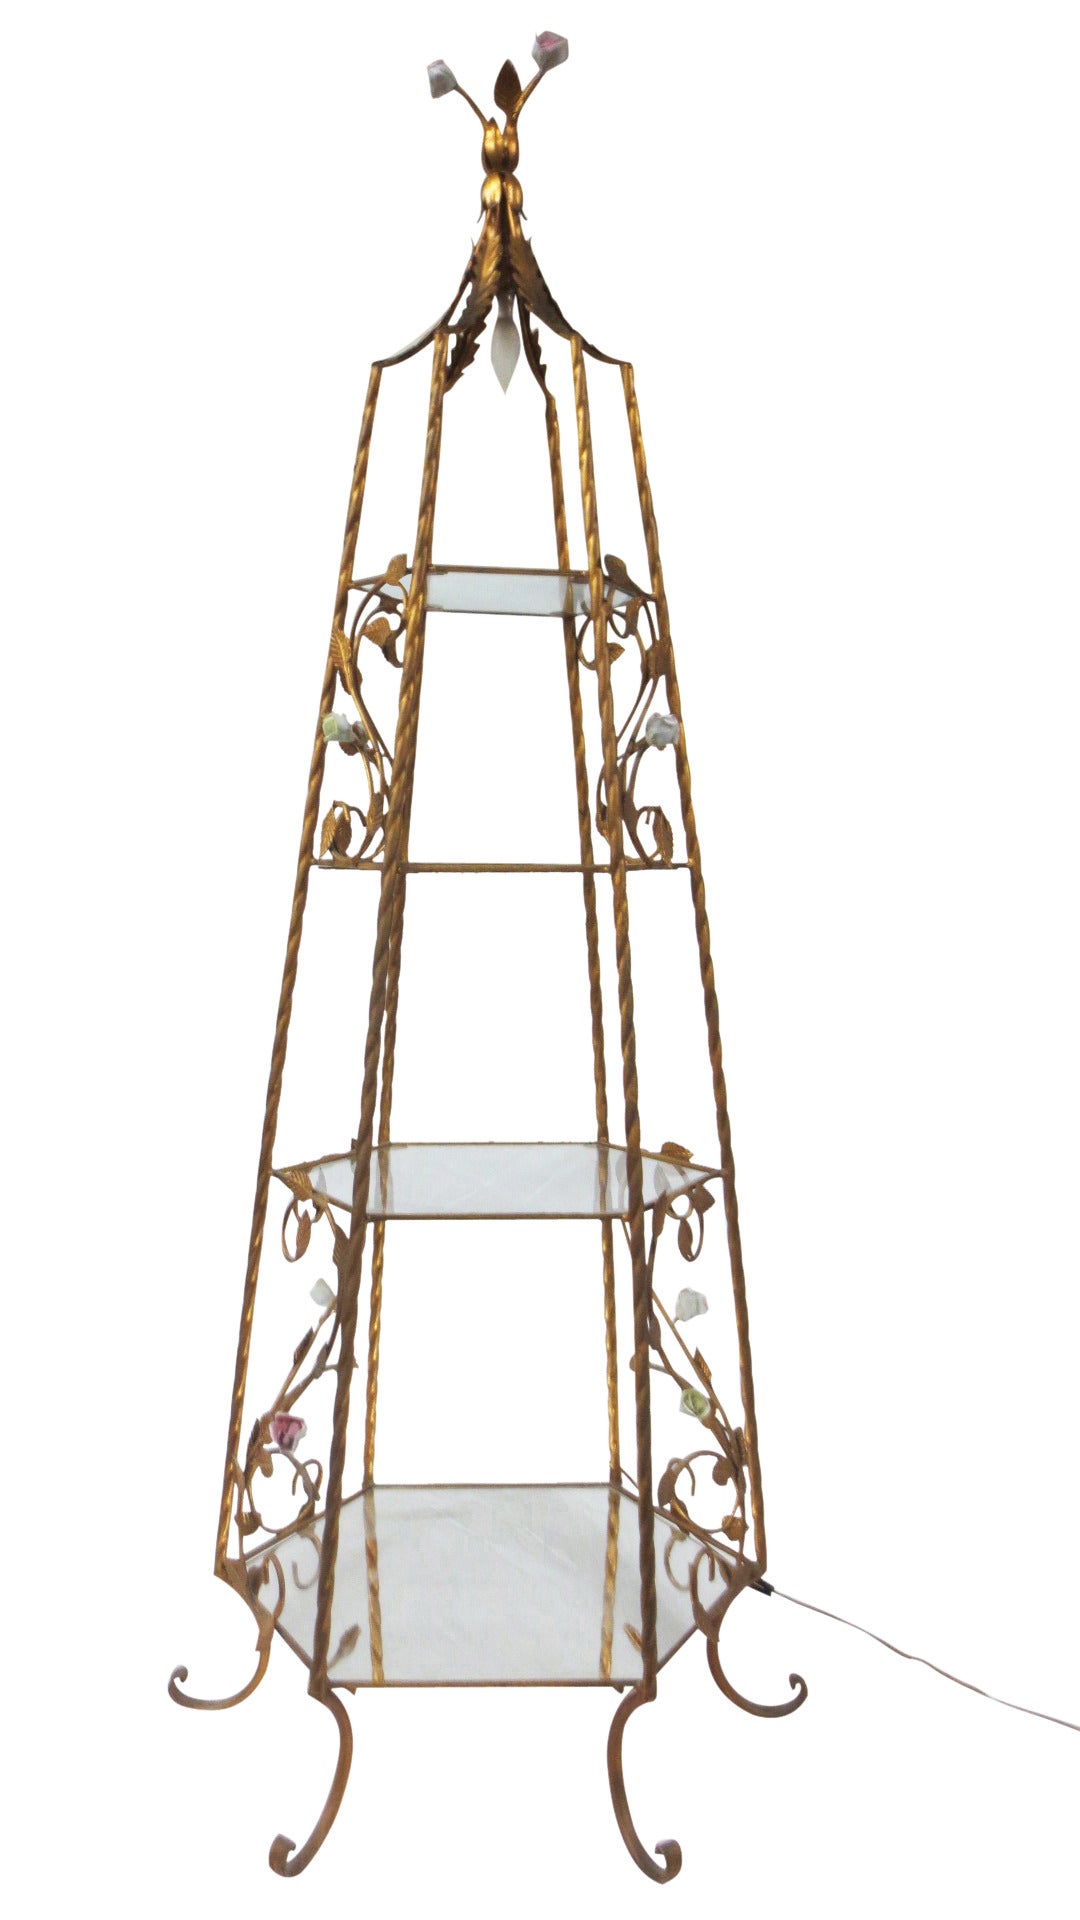 Italian rococo brass and porcelain floral etagere with mirrored bottom shelf and all other shelves clear glass, electrified.